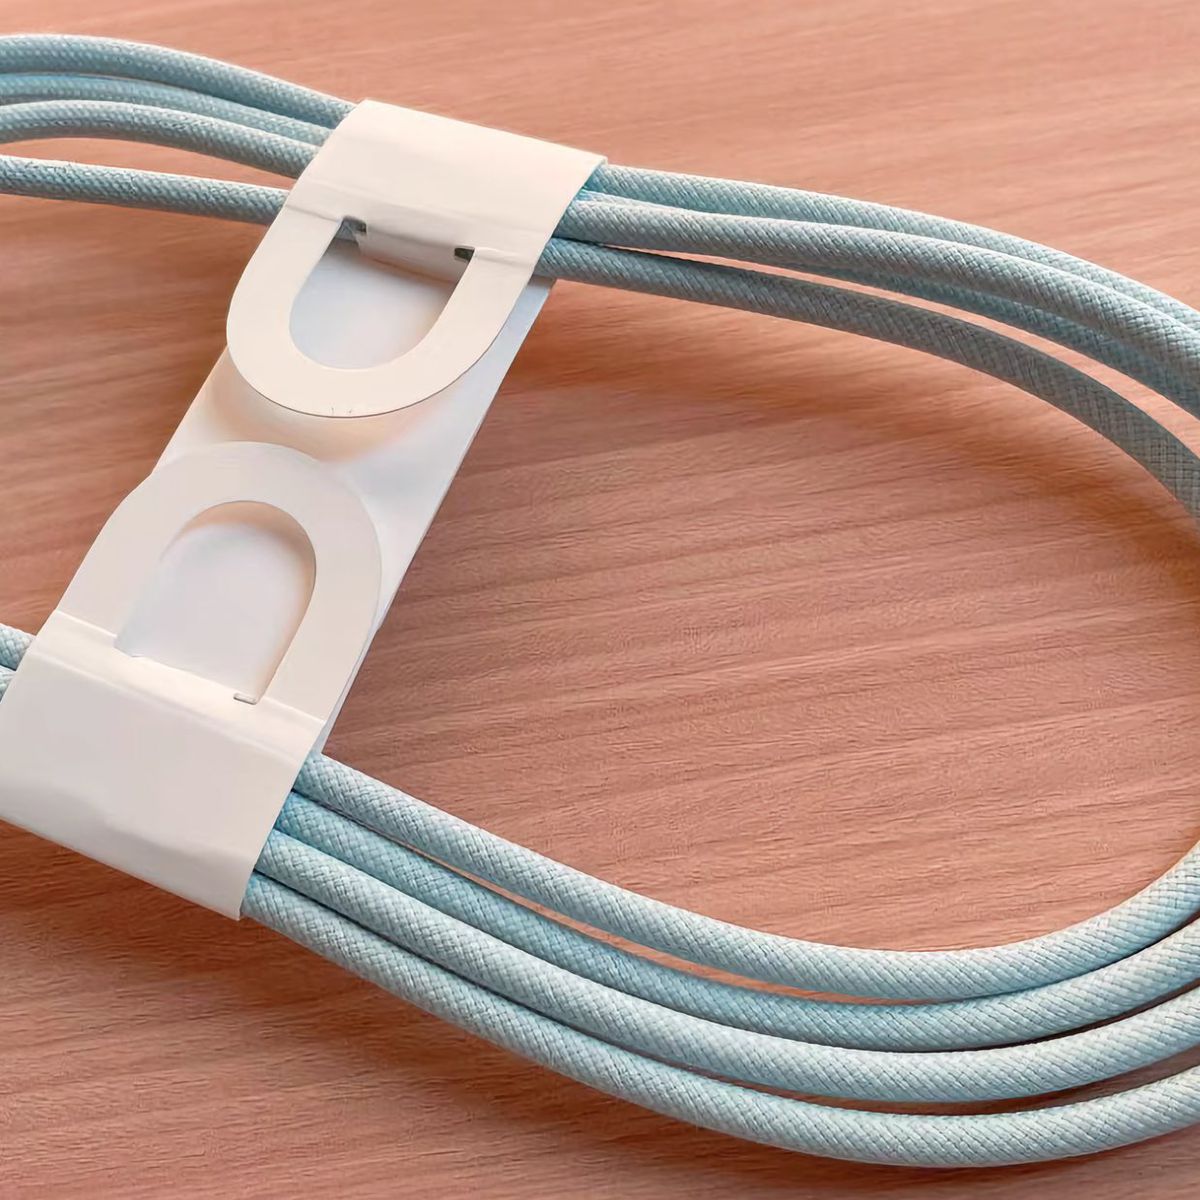 iPhone 12 Could Ship With New Braided USB-C to Lightning Cable - MacRumors